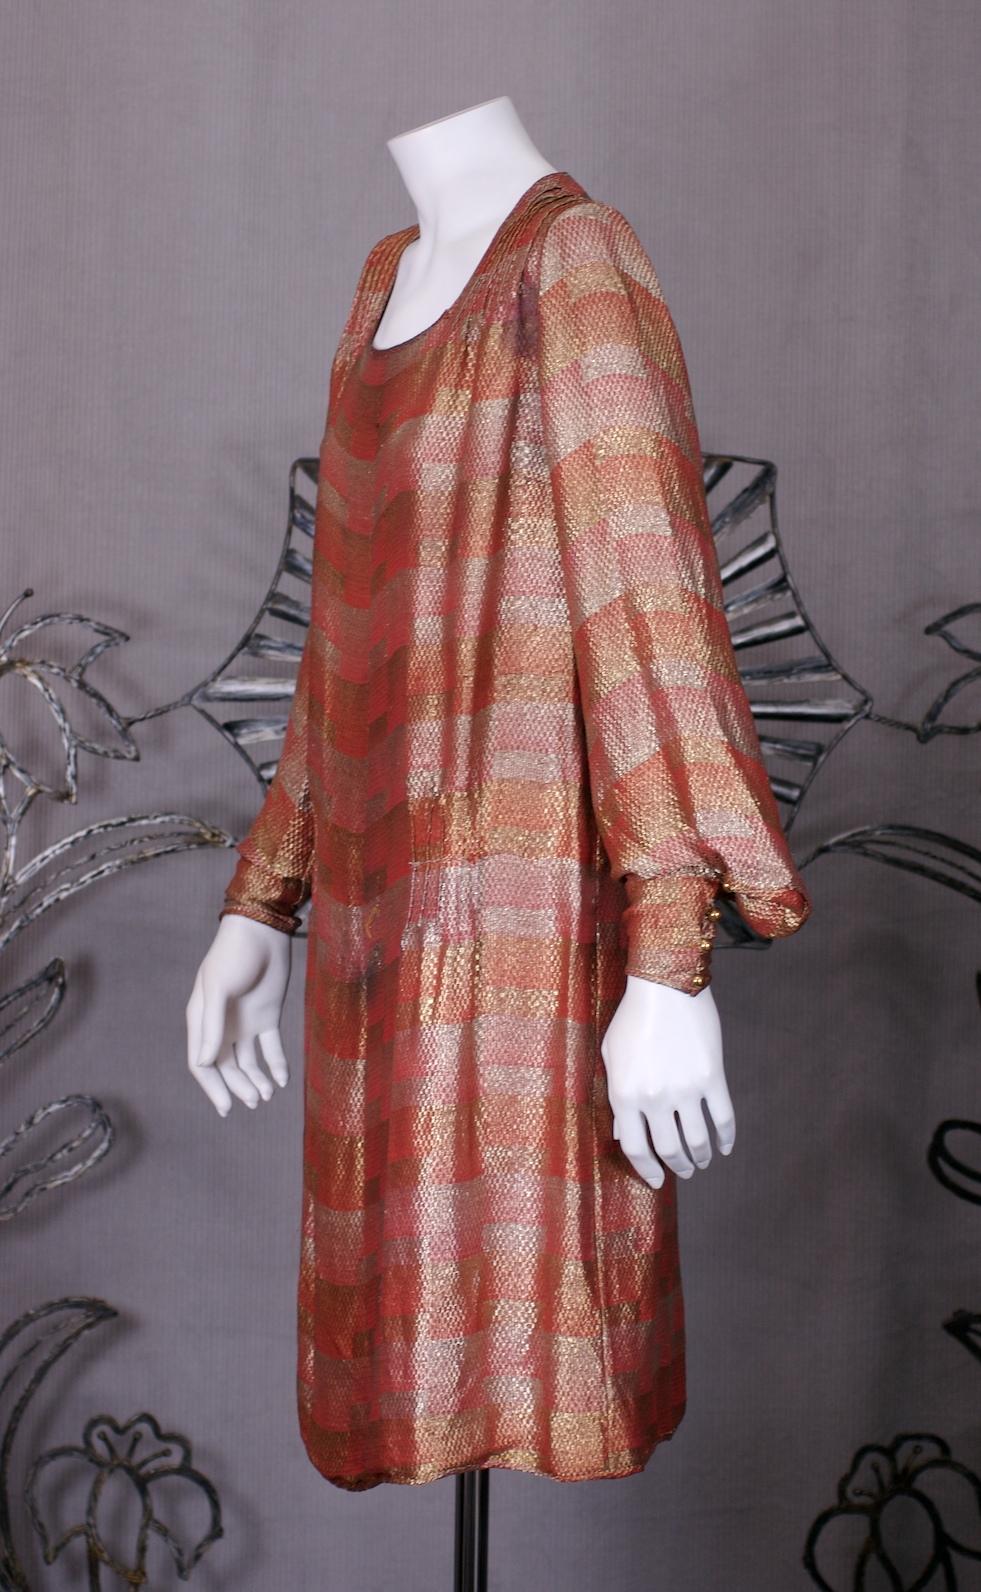 Lucien LeLong Art Deco lame broche cocktail dress about 1925. In autumnal tones, with orangey gold and silver metallic cubist patterns along its horizontal striping. Finely pintucked at shoulder with gold buttoned cuffs and full sleeves. 
Chiffon